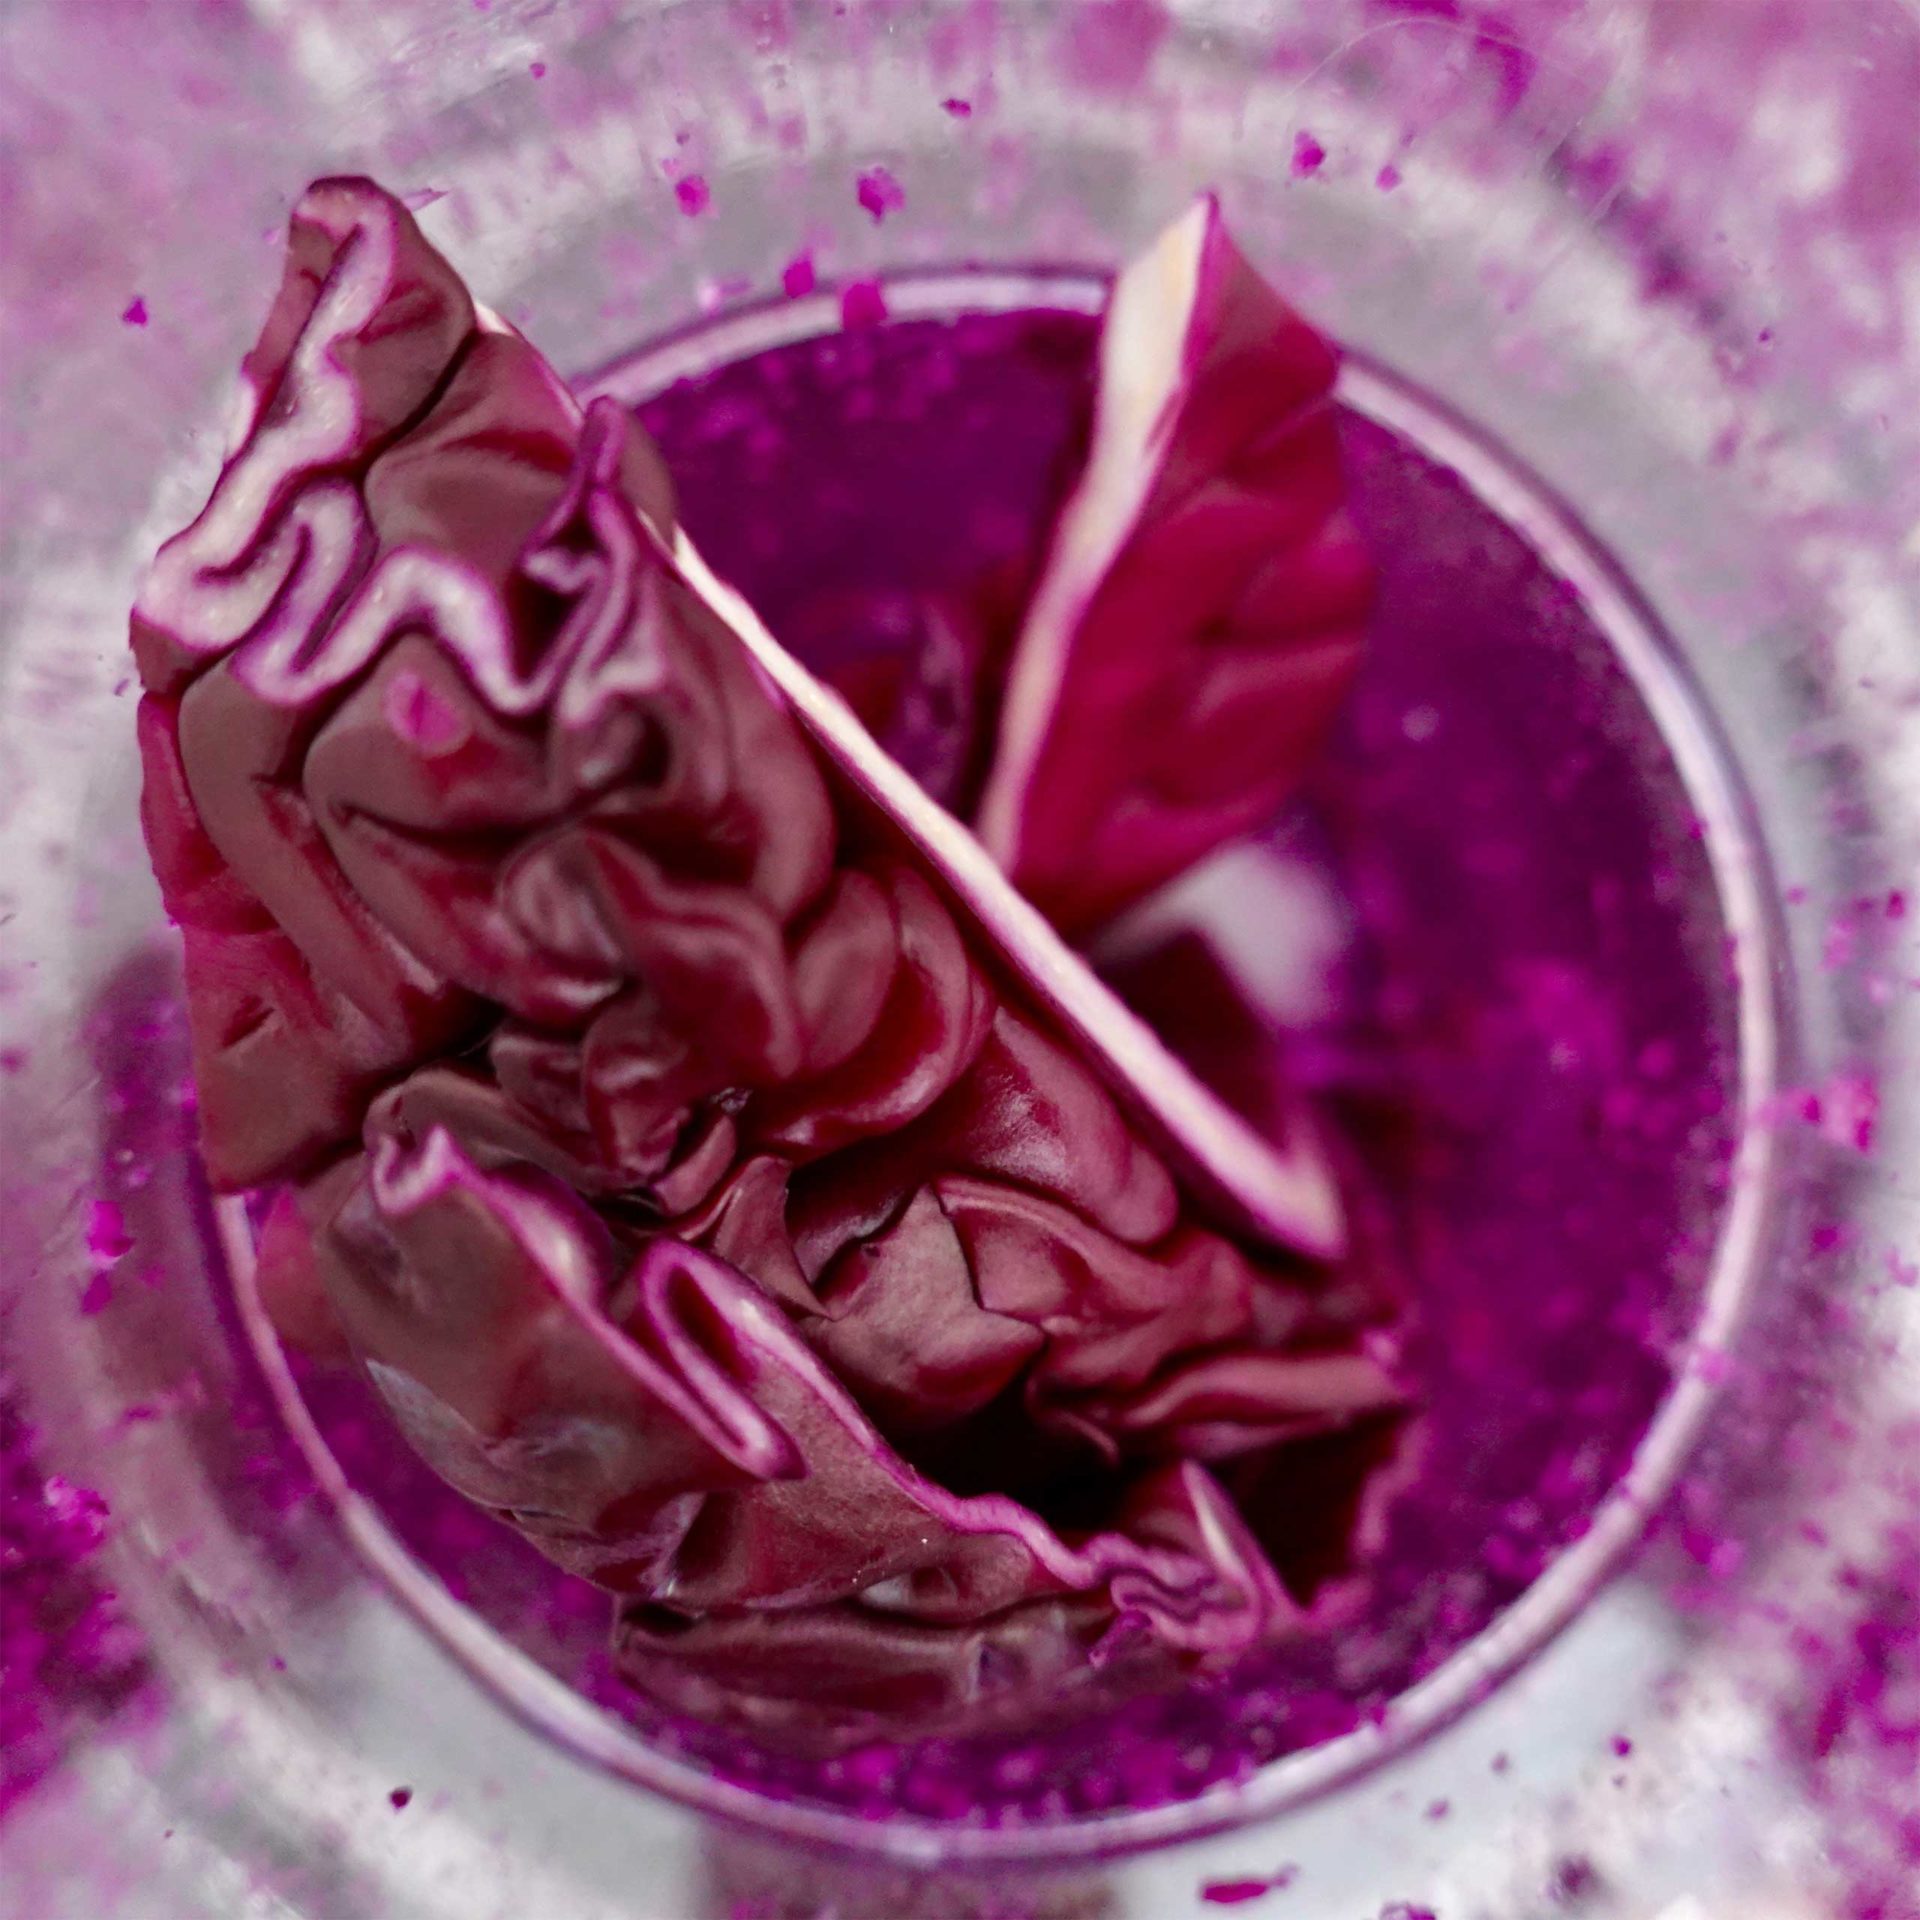 A head of red cabbage in the MILK. Food Lab Frankfurt